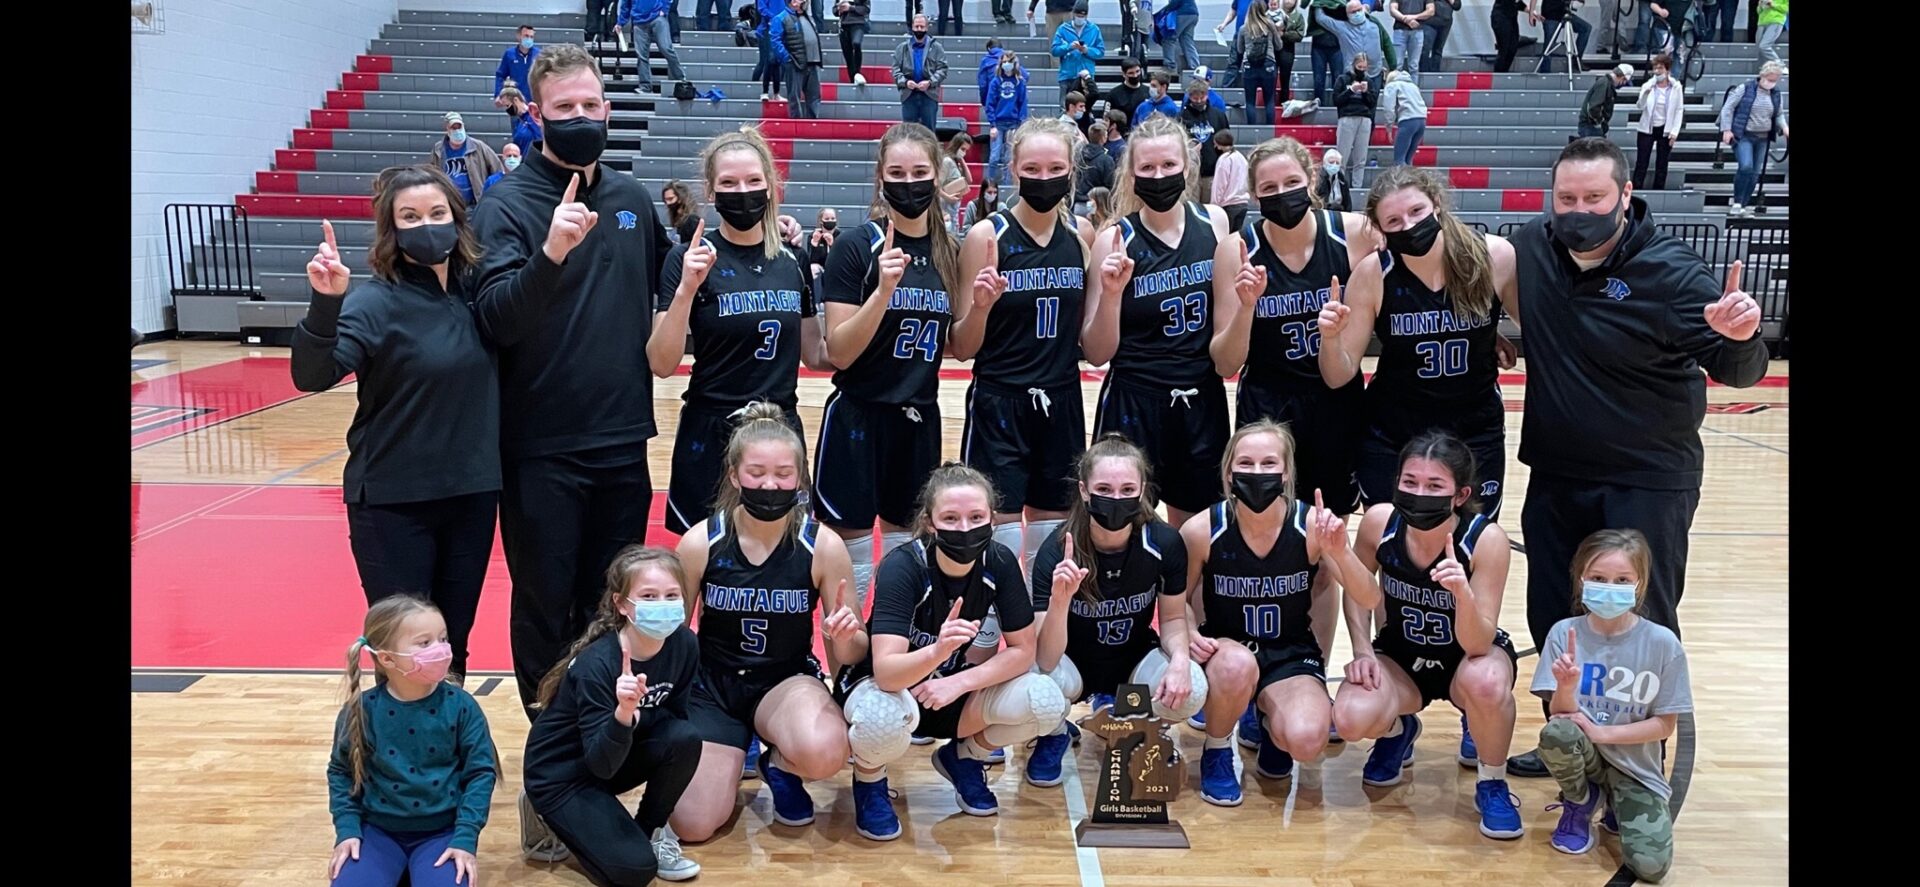 Montague girls basketball team pulls away from Whitehall in second half, finally captures Division 2 district championship